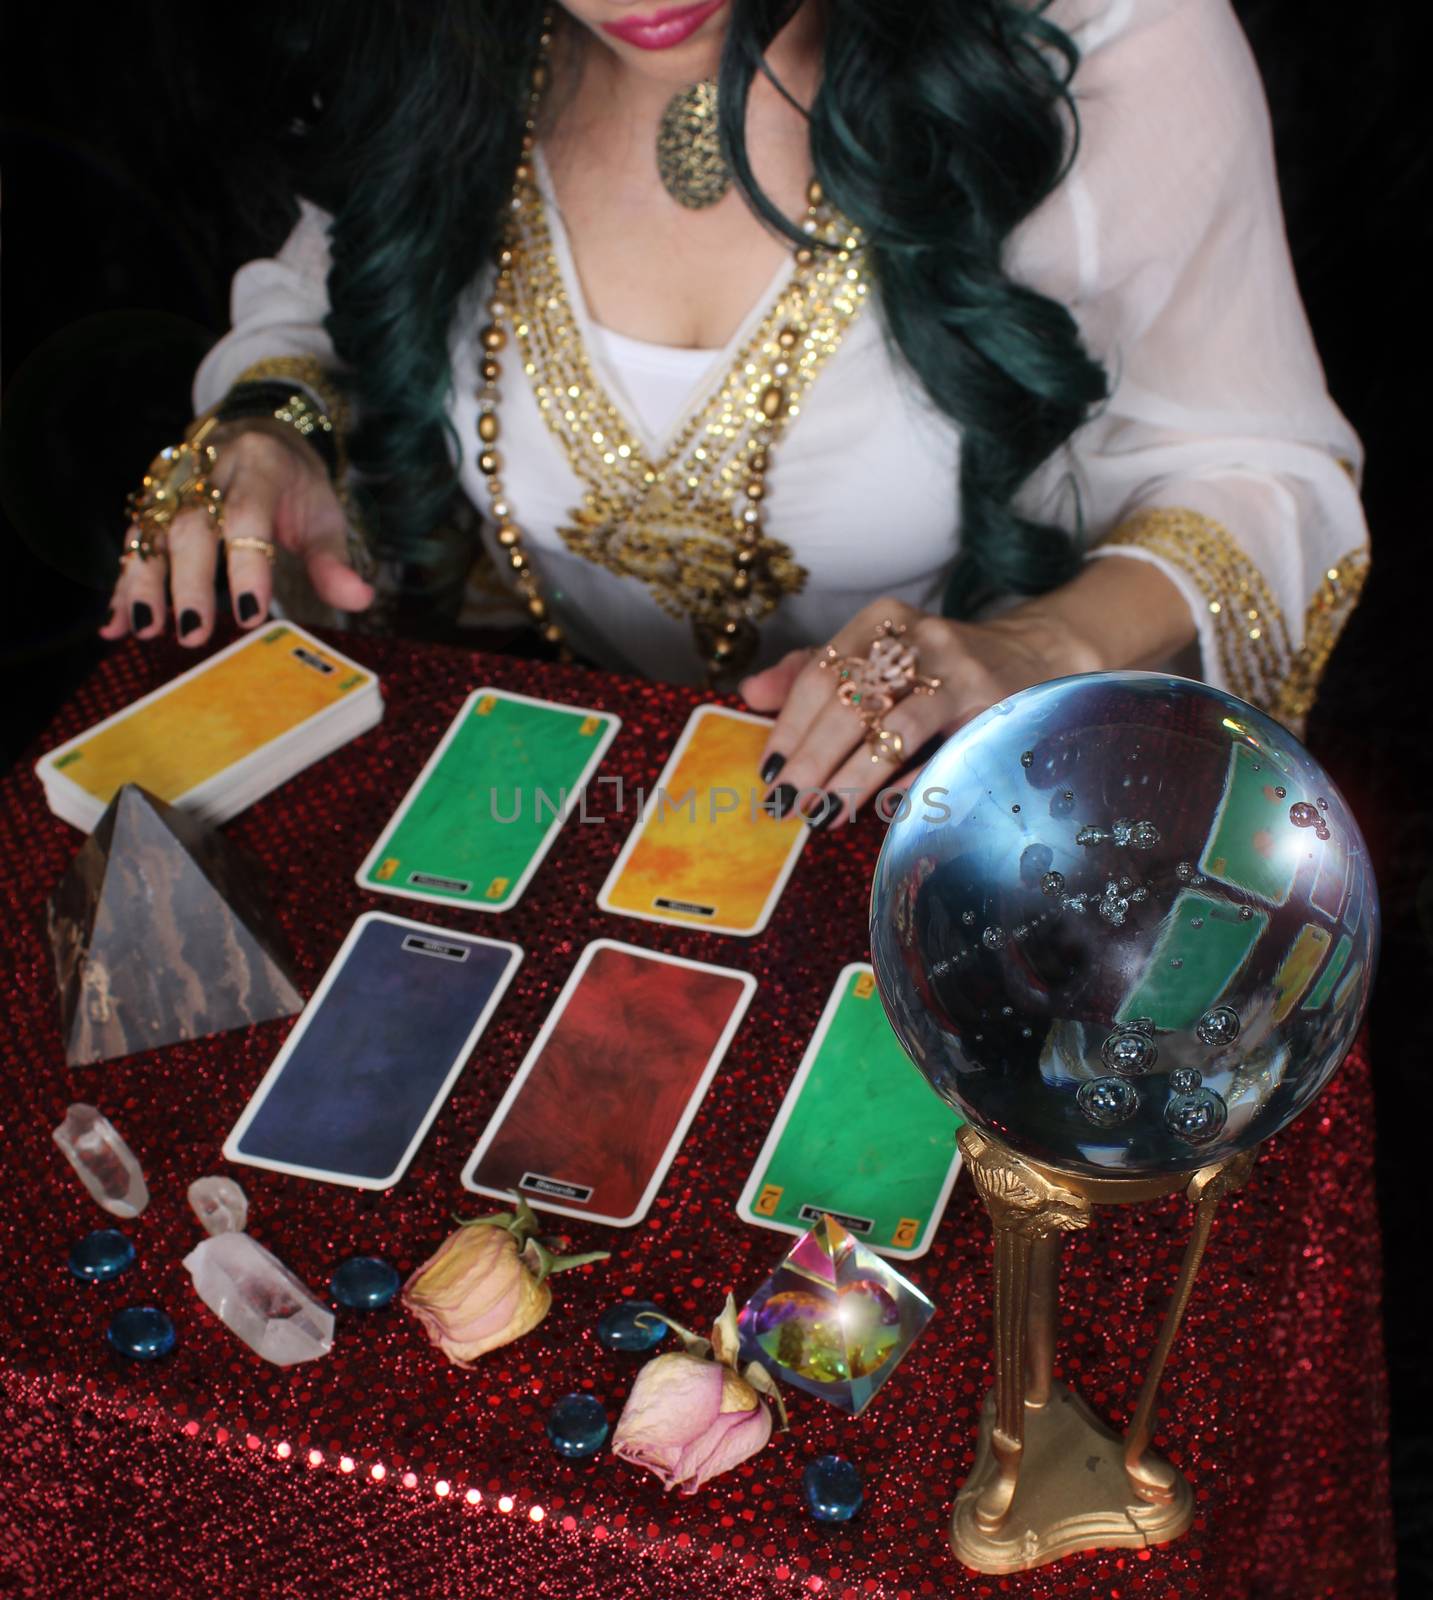 Psychic with Black and Green Hair, crystal ball and tarot cards